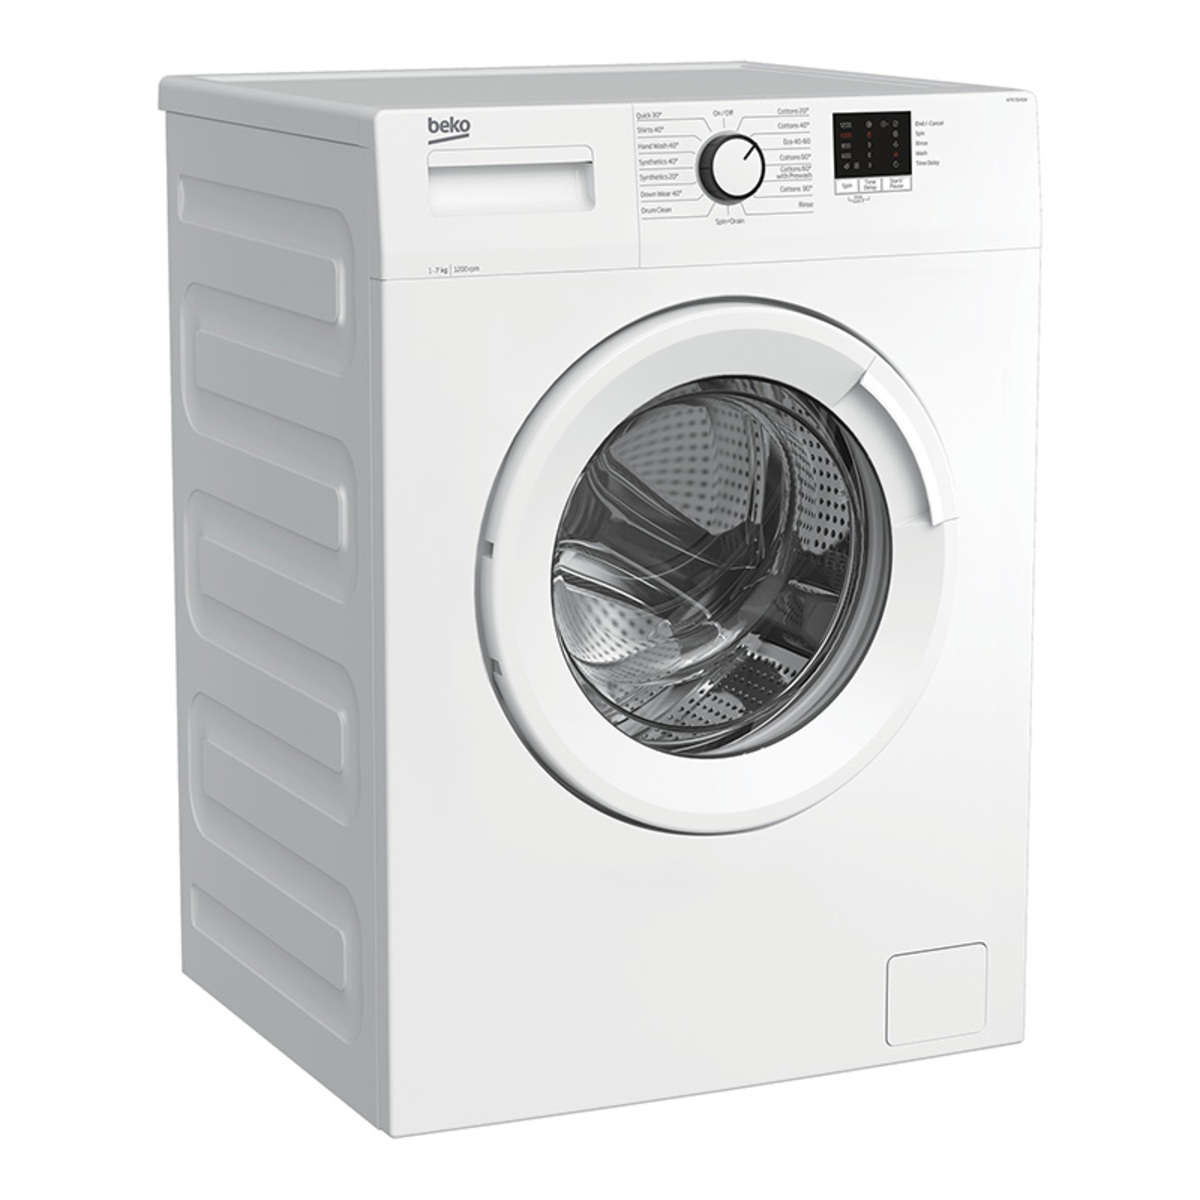 Beko WTK72041W D Rated 7kg 1200 Spin Washing Machine in White